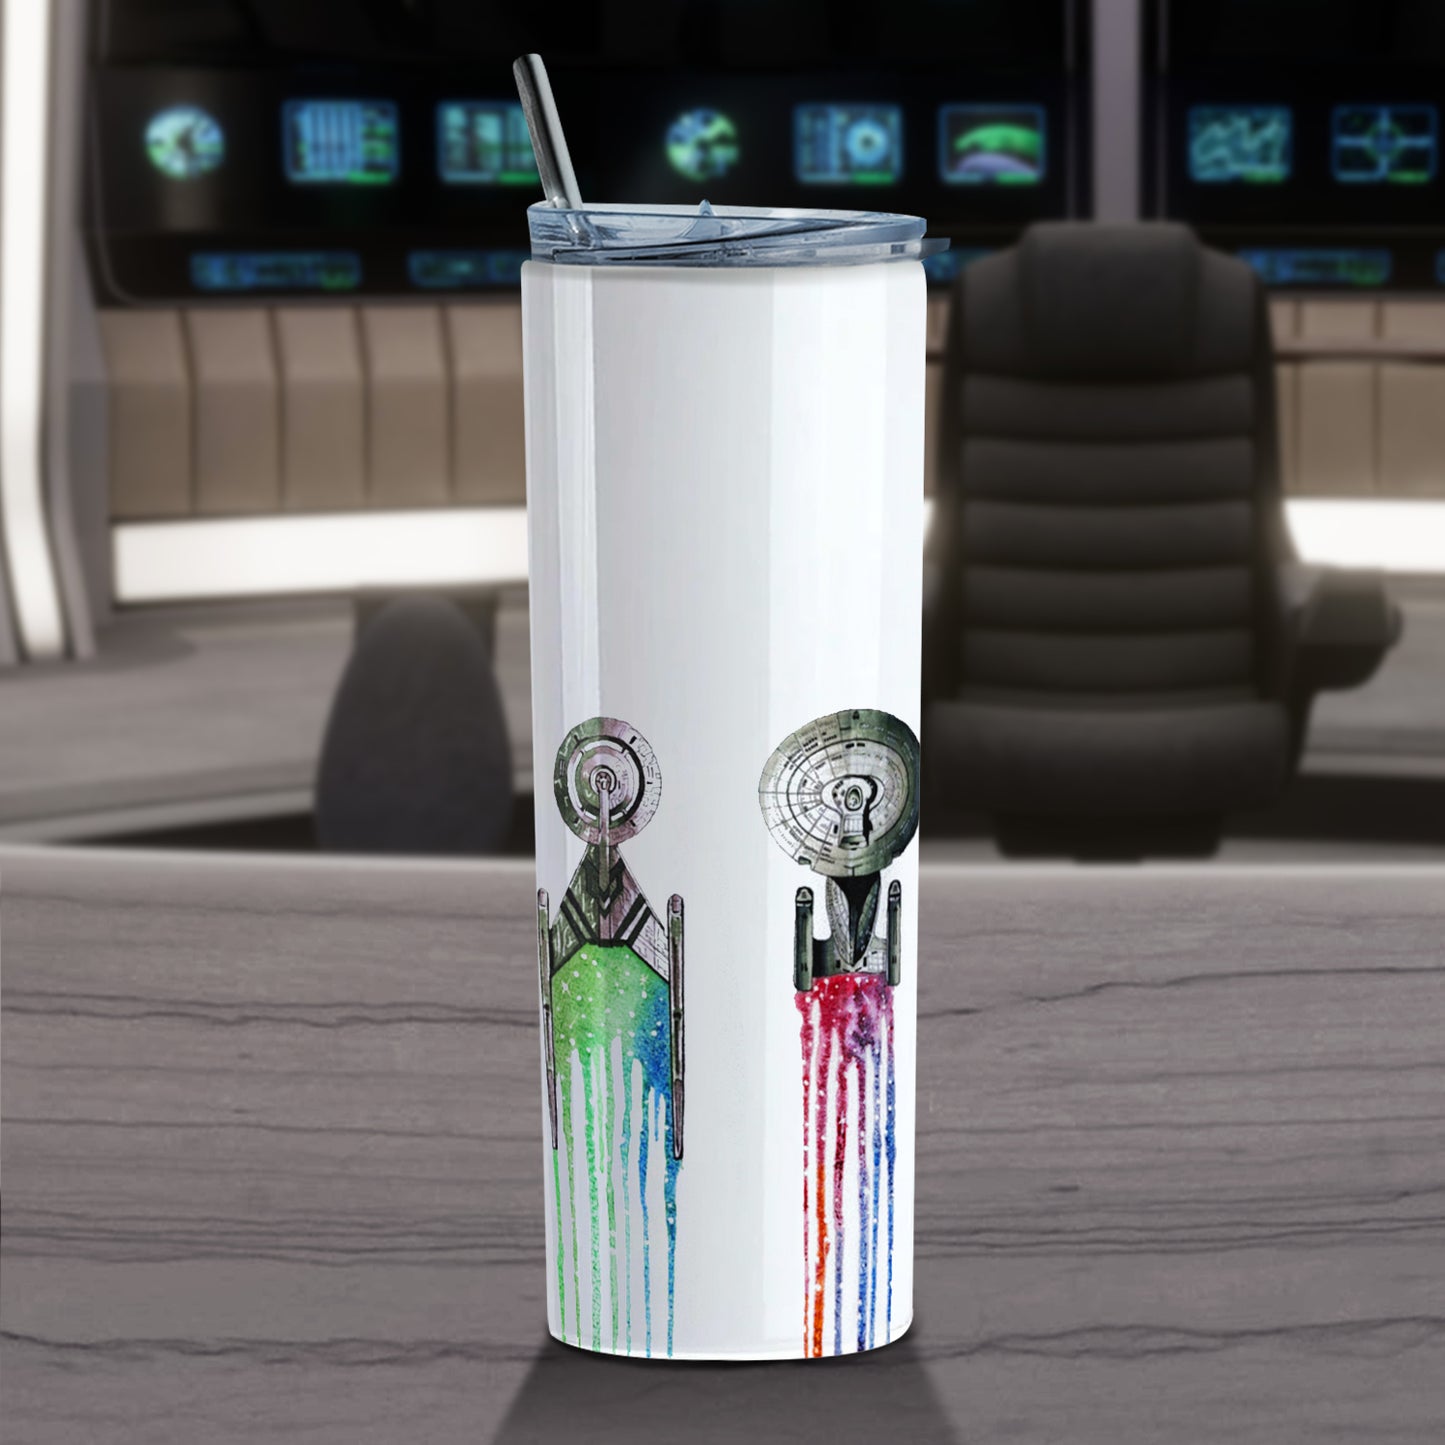 A white travel mug on a grey ledge. On the surface of the mug are images of spaceships from Star Trek, with small segments of deep space behind each. At the top of the mug is a stainless steel straw. Behind the mug is the bridge of a Star Trek ship.